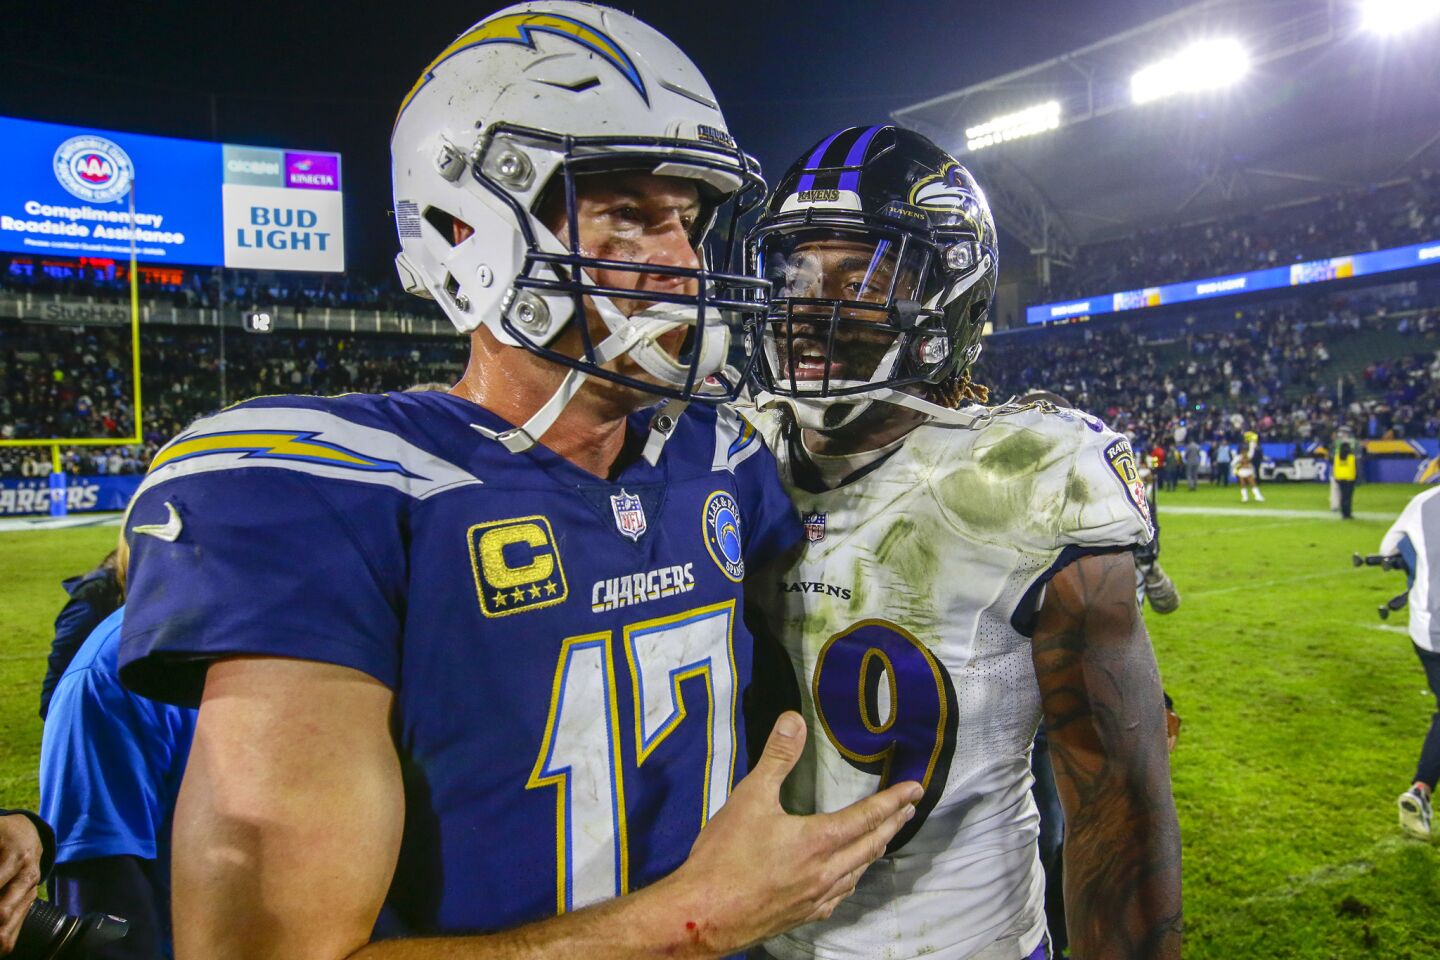 Ravens linebacker Matthew Judon gives Chargers quarterback Philip Rivers an earful of taunting soon after the Ravens defeated the Chargers 22-10 at StubHub Center.